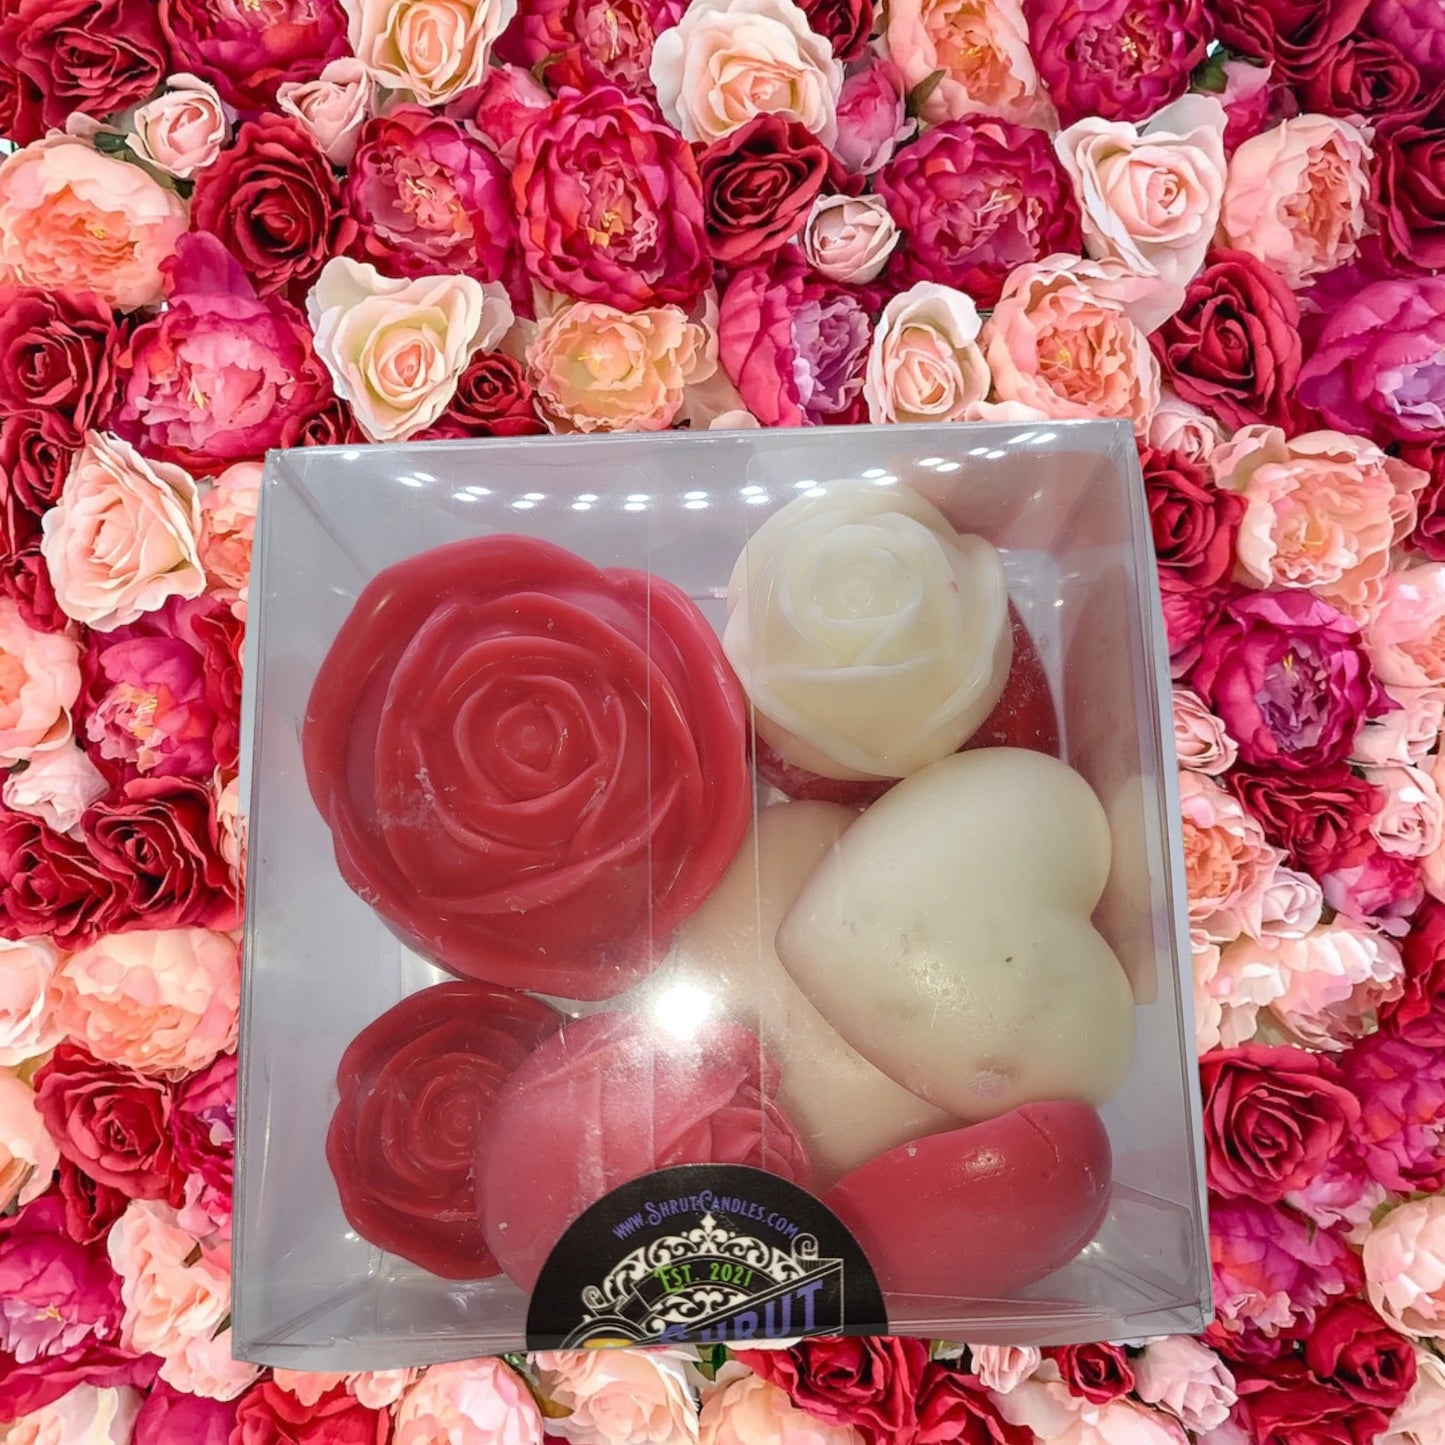 Romantic Blossom Bliss Scented Wax Melts: A Symphony of Floral Aromatherapy for Unforgettable Ambiance